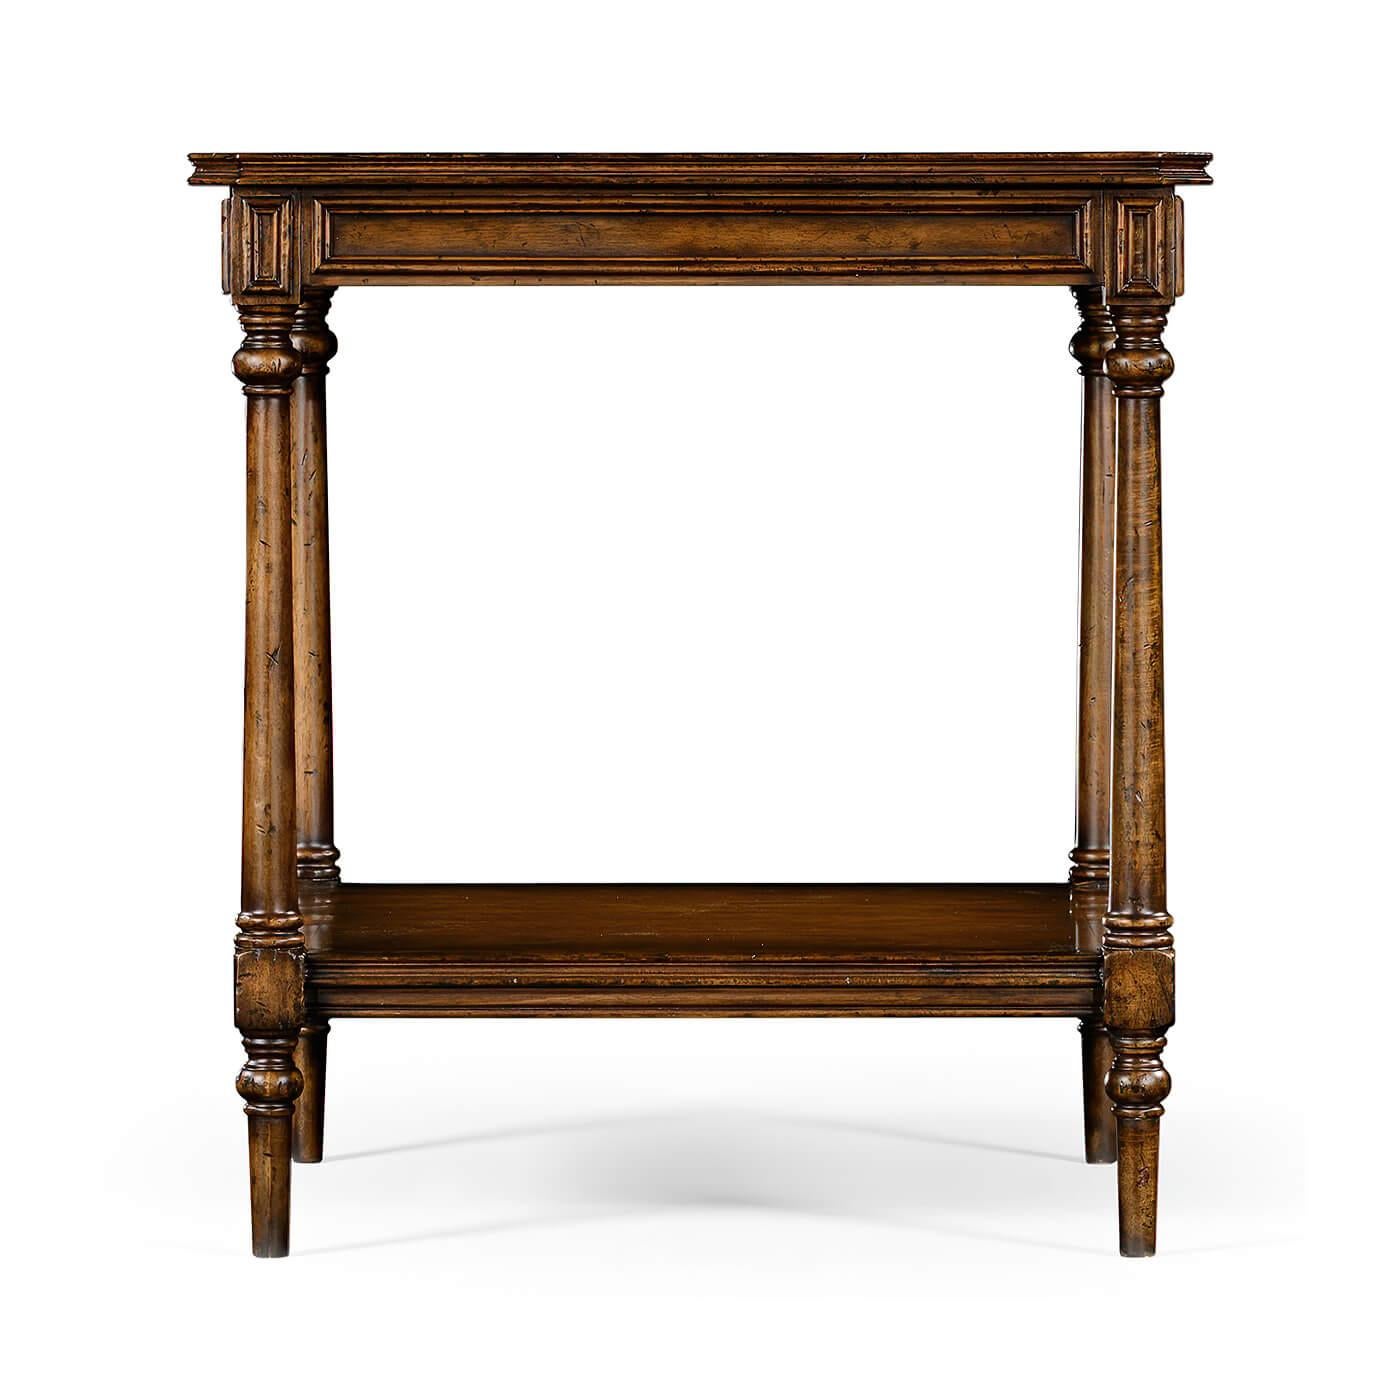 Georgian style square walnut side tables, the top with canted corners set above a paneled frieze and turned baluster legs around an under tier.

Dimensions: 24